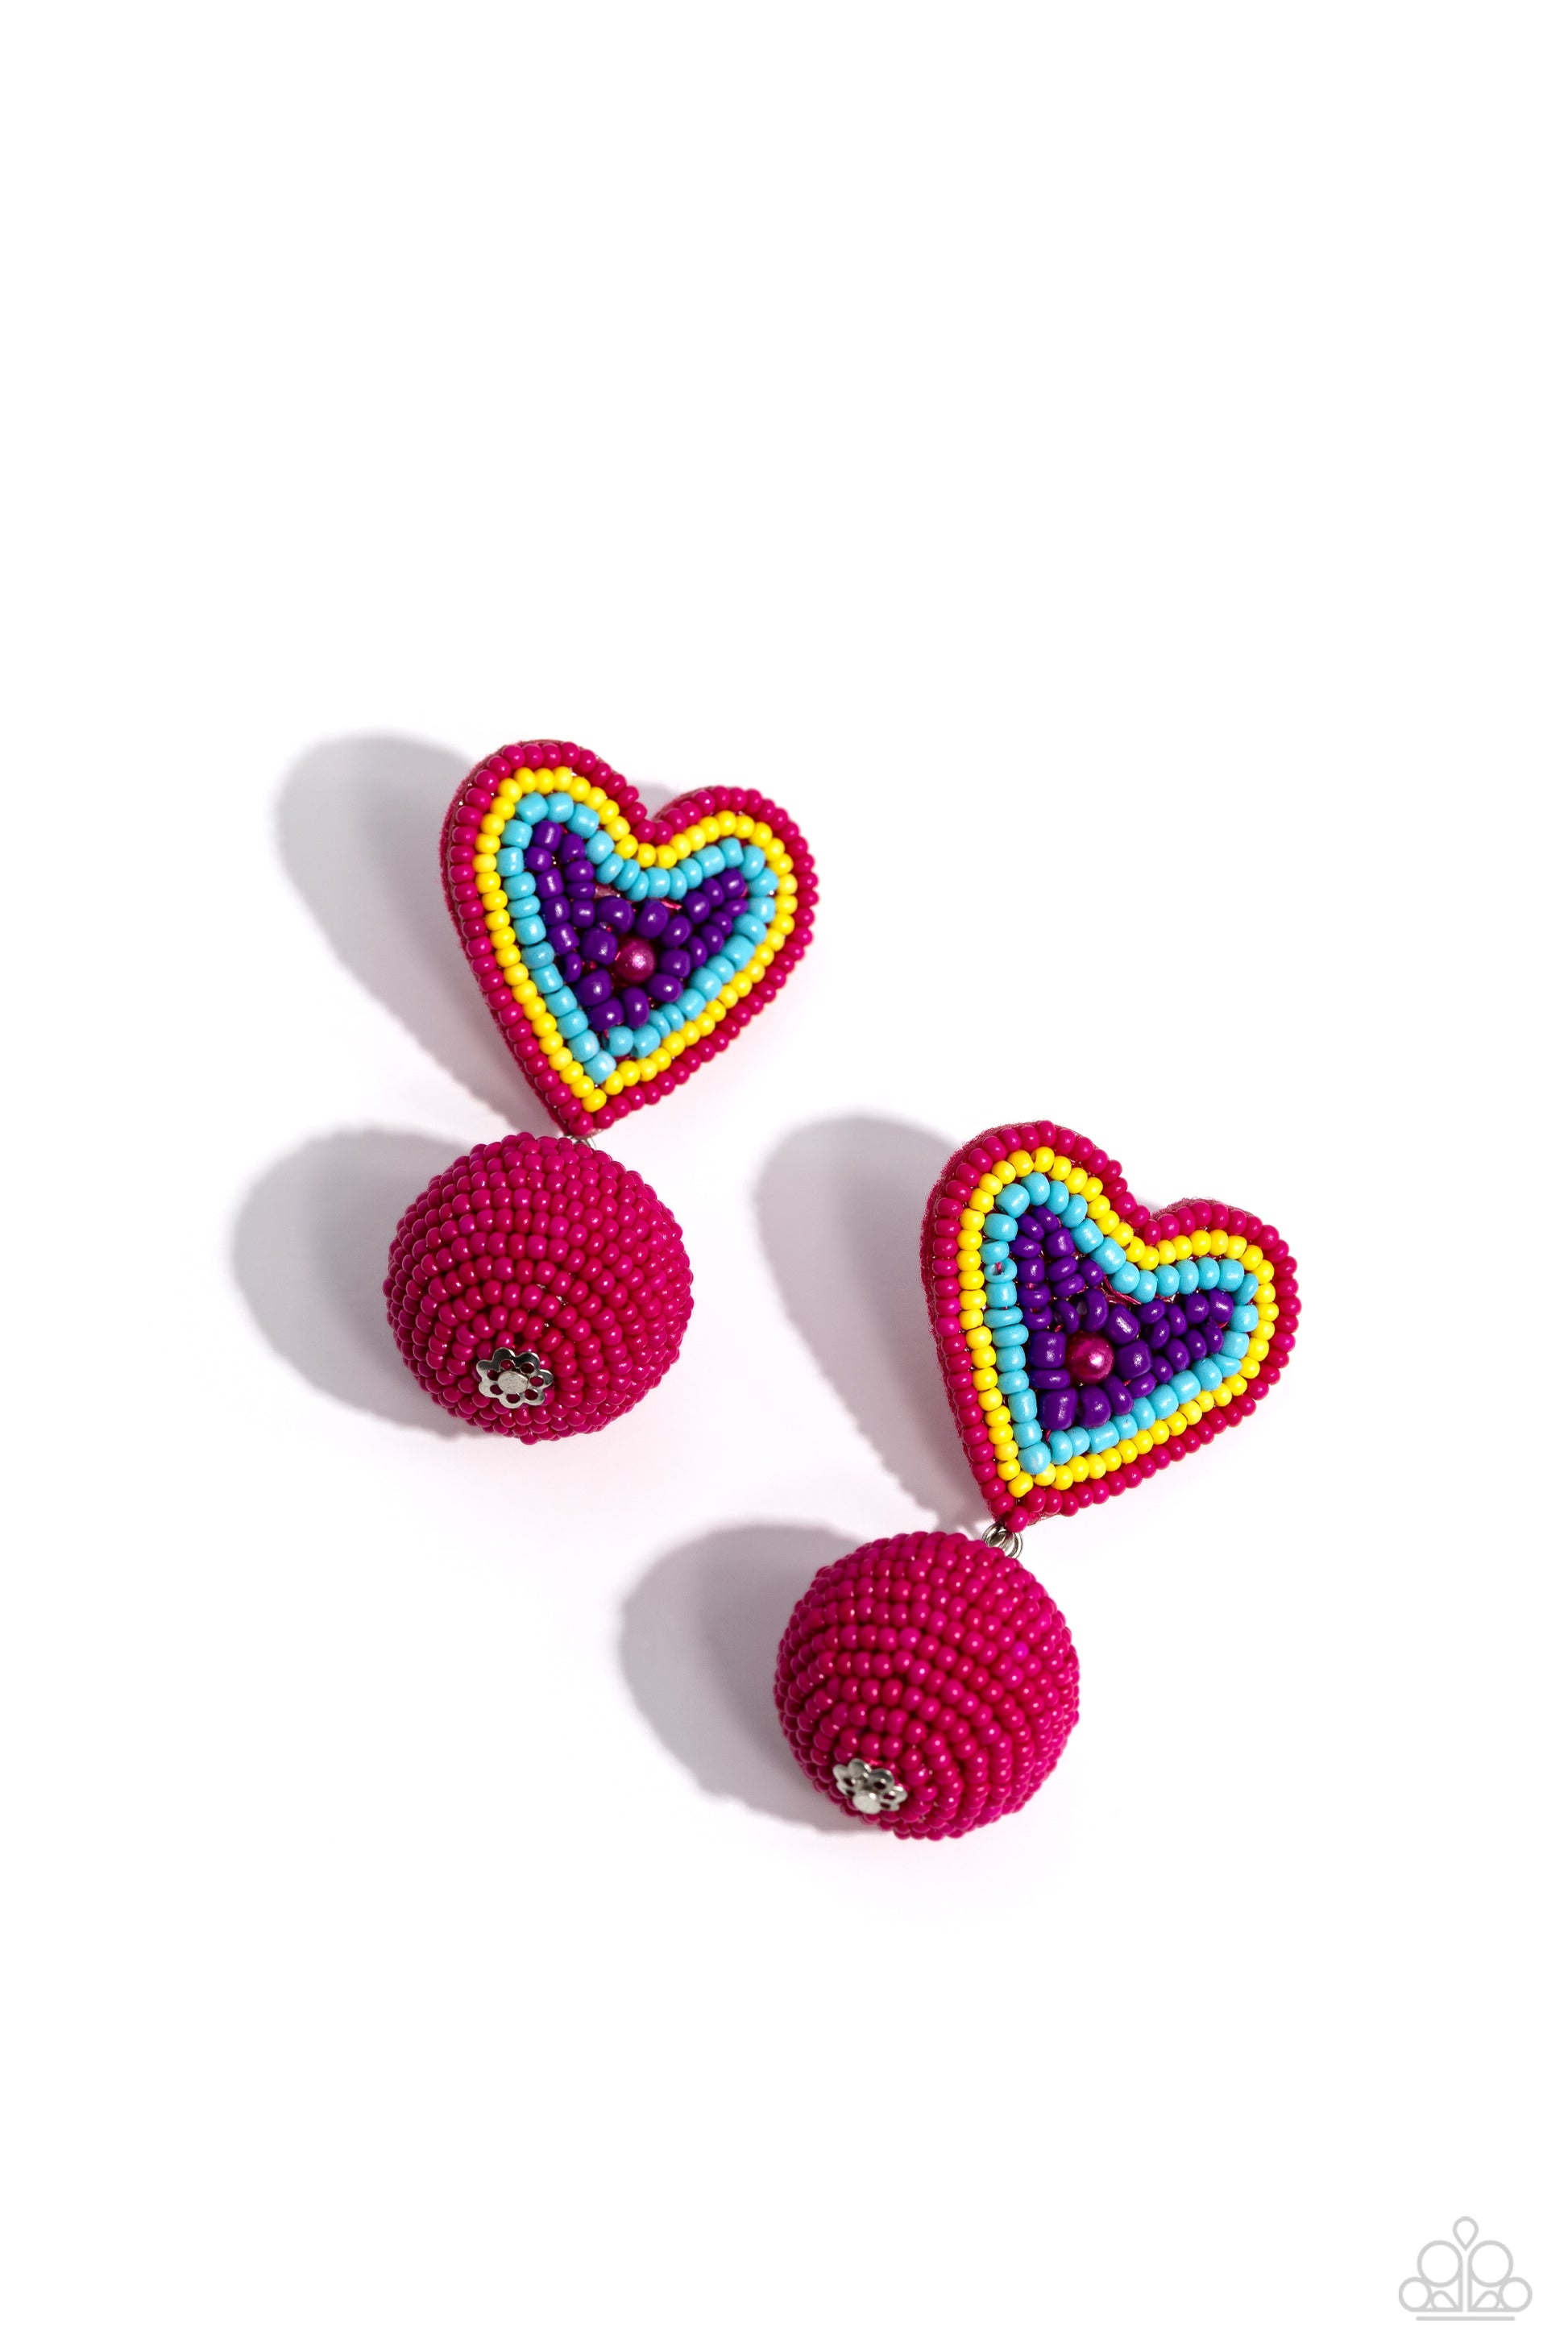 Spherical Sweethearts Multi Seed Bead Heart Post Earring - Paparazzi Accessories  Featuring a hot pink pearl center, a hot pink, yellow, turquoise, and purple seed bead heart frame gives way to strands of hot pink seed beads that decoratively spin around a spherical frame, resulting in a colorful three-dimensional display. Earring attaches to a standard post fitting.  Sold as one pair of post earrings.  P5PO-MTXX-106XX